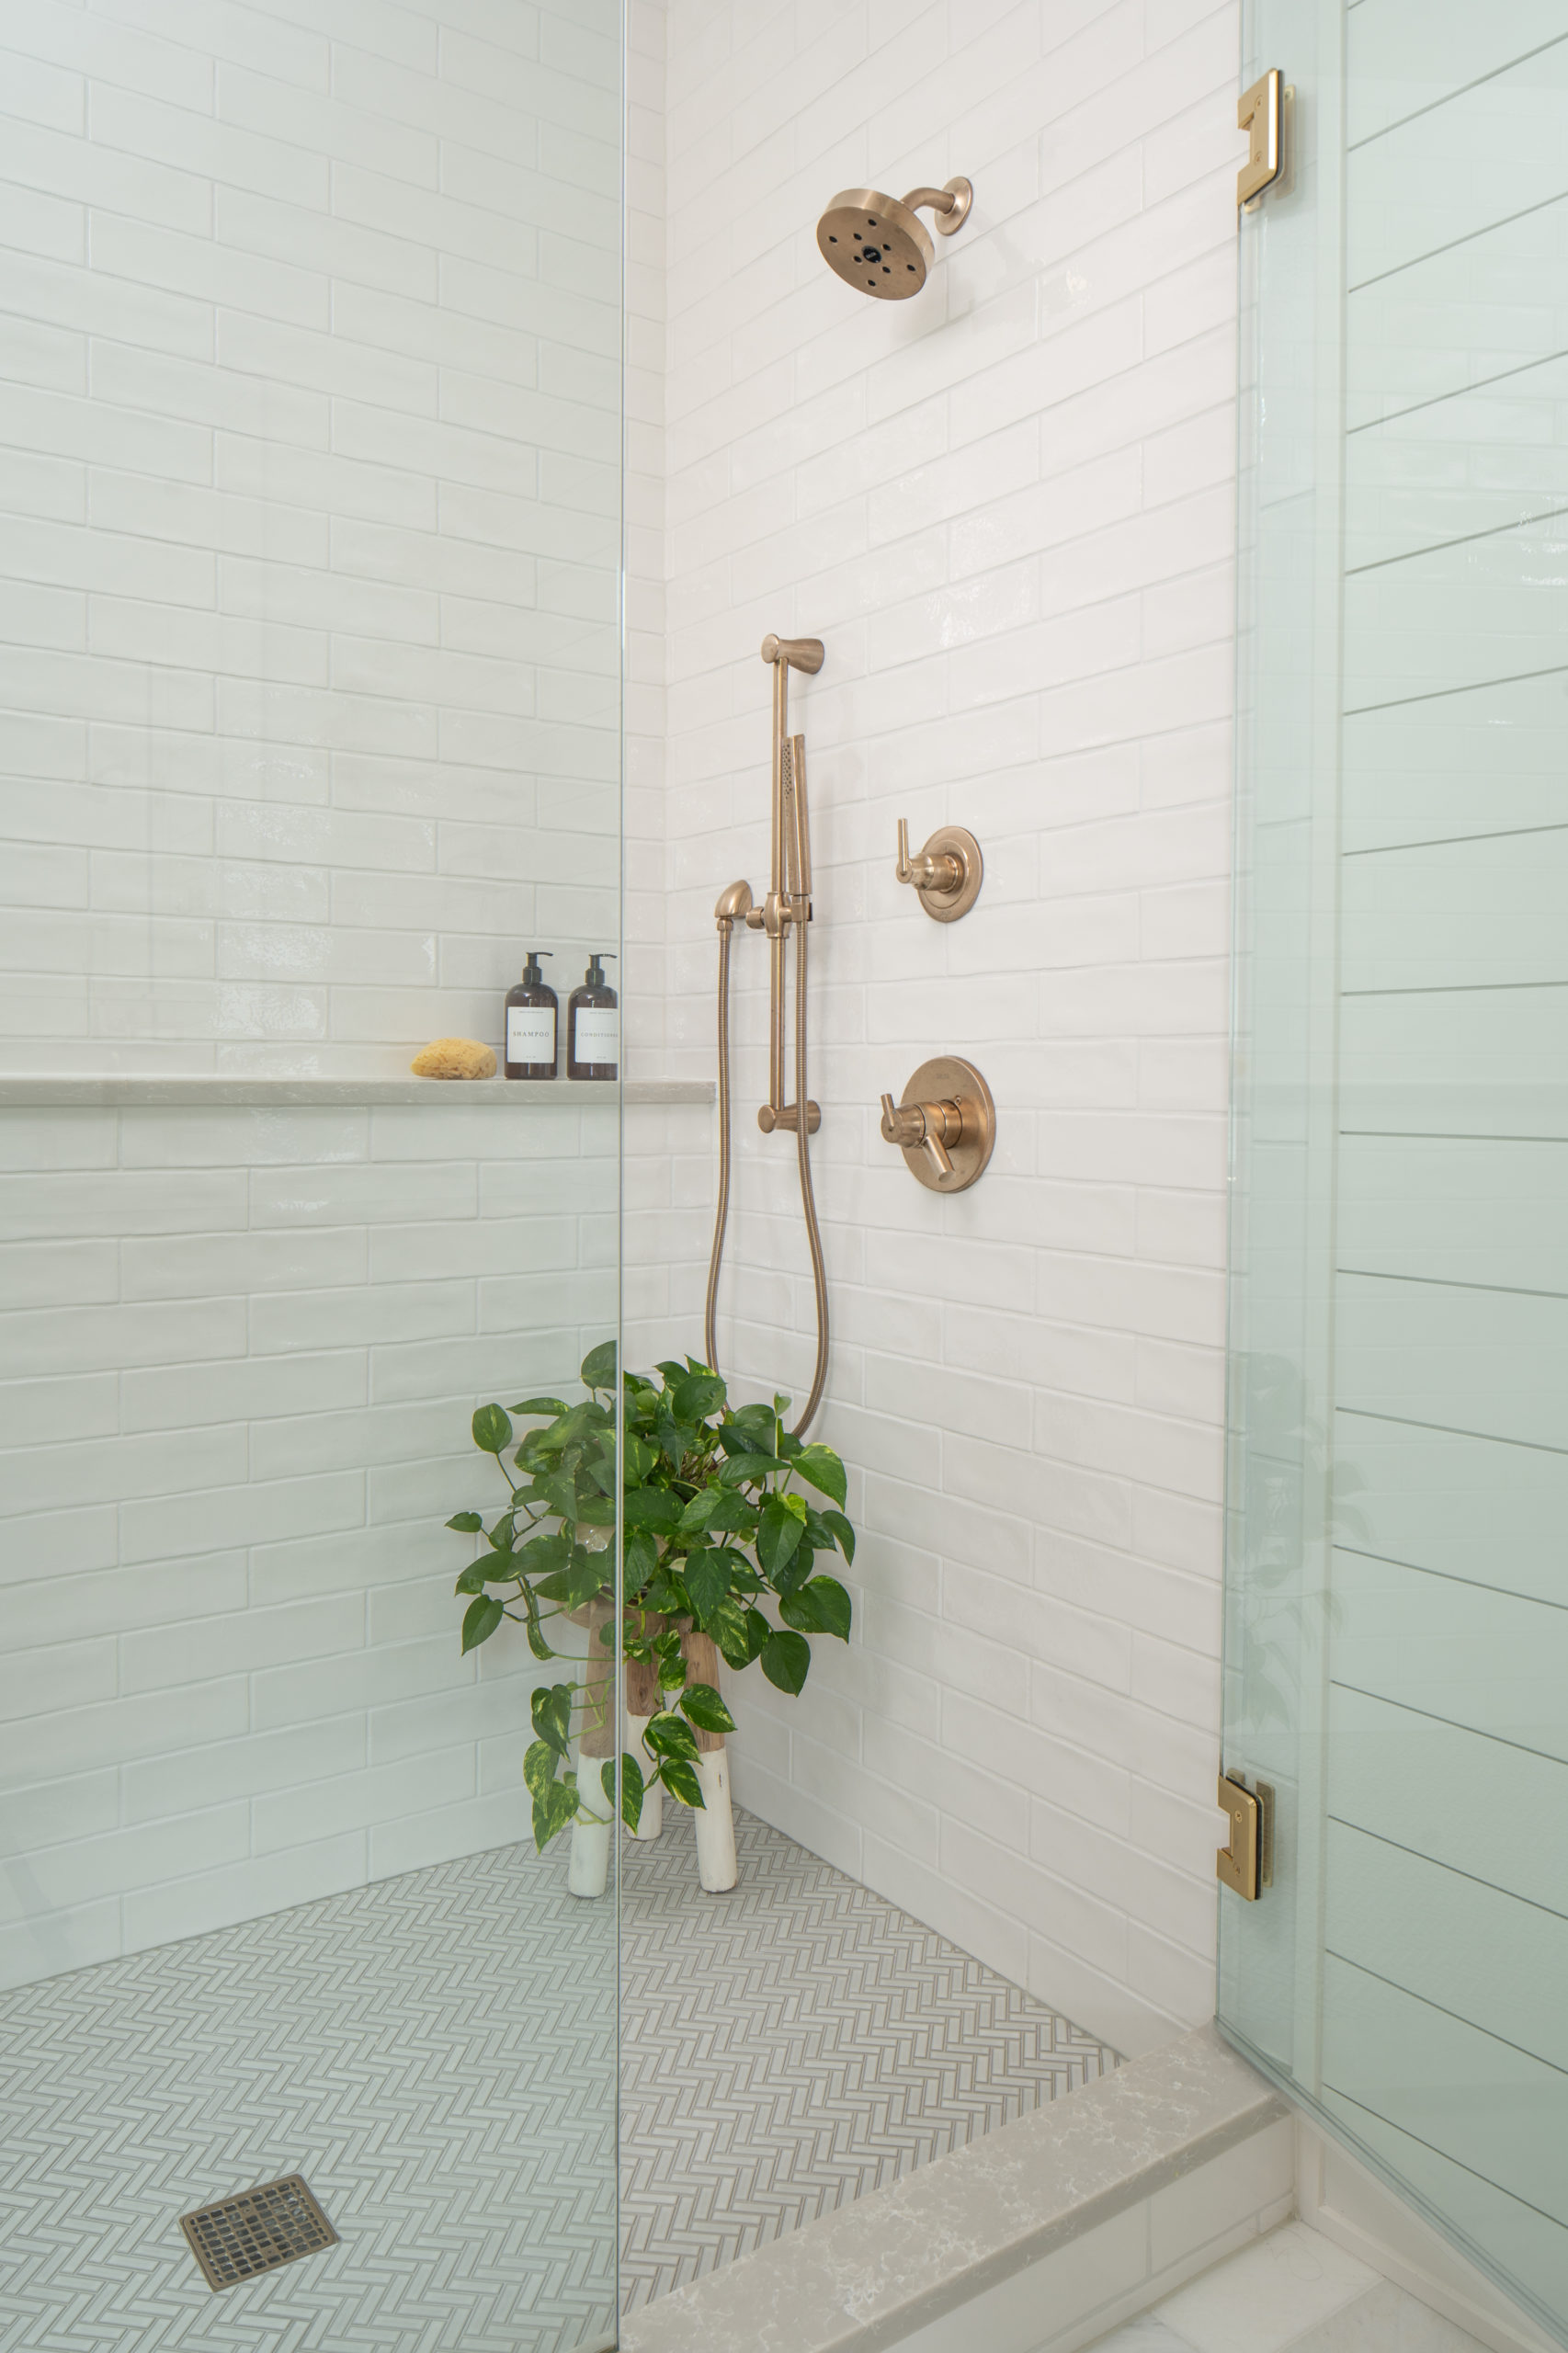 The Lake Escape custom home remodel features a bathroom with a glass shower stall and a plant.